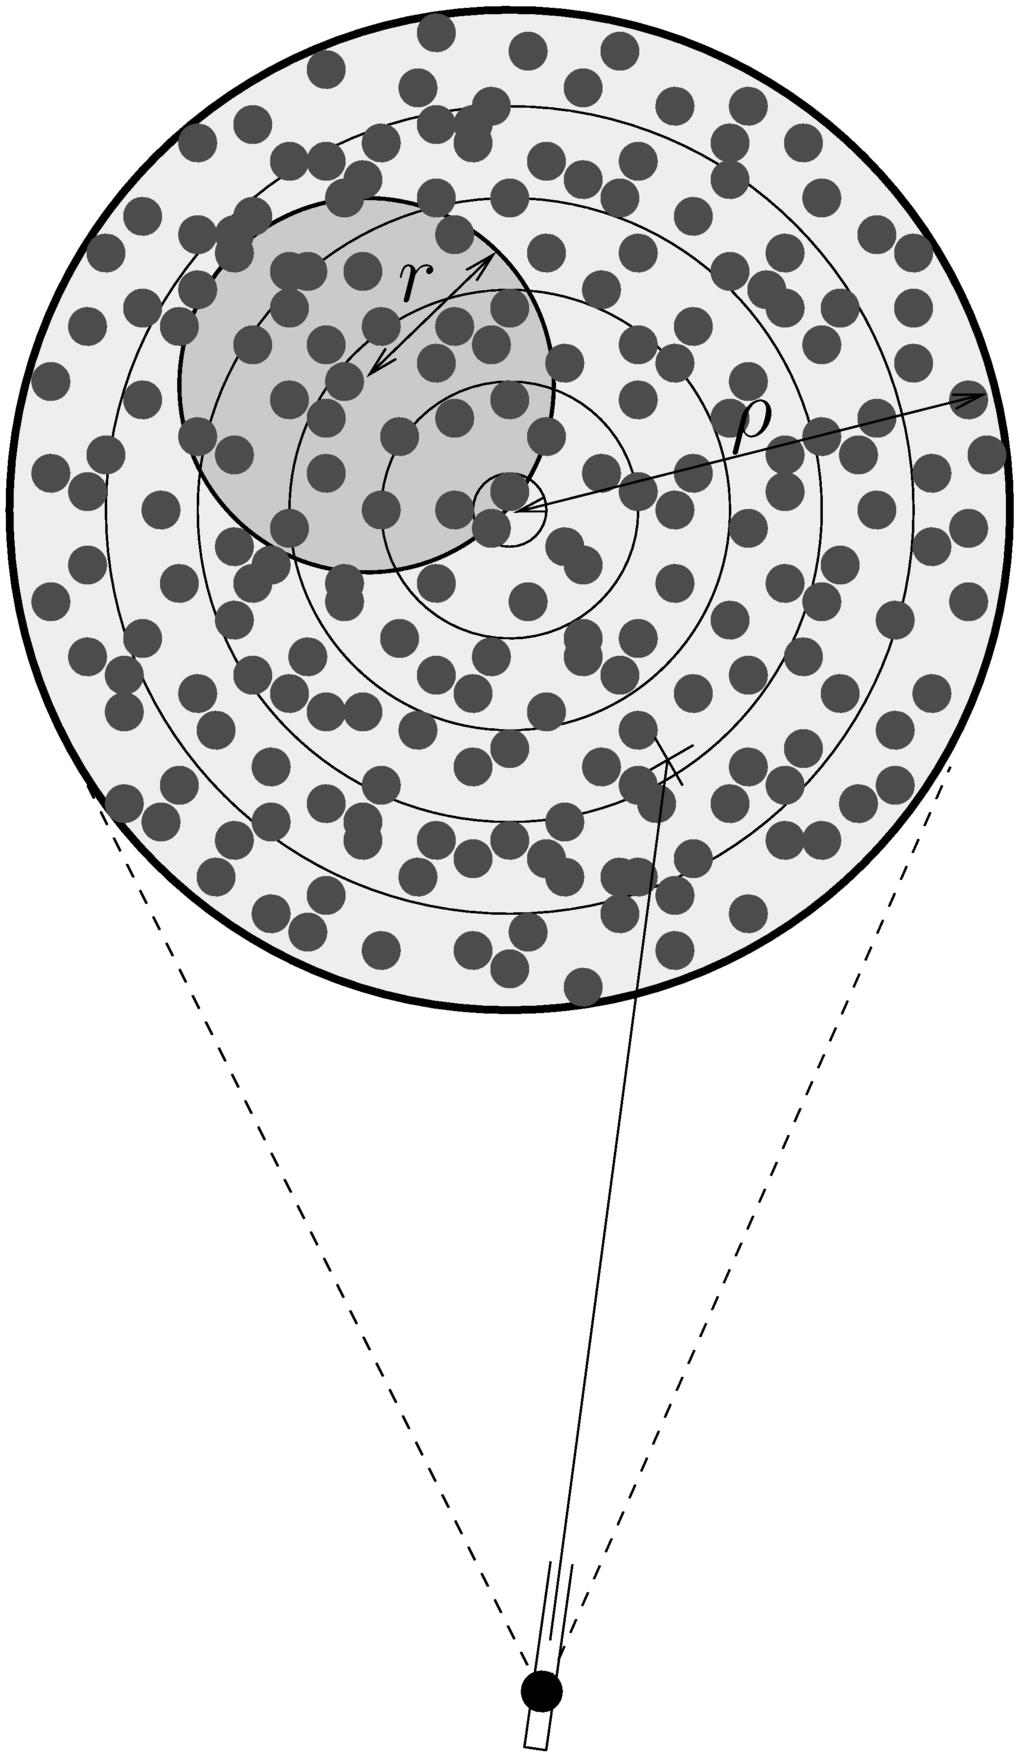 Figure 2: If the size of the balloon is constant and the uniform distribution of the shots on the target is provided then the relative frequency of event A is approximately equal to πr2 probability